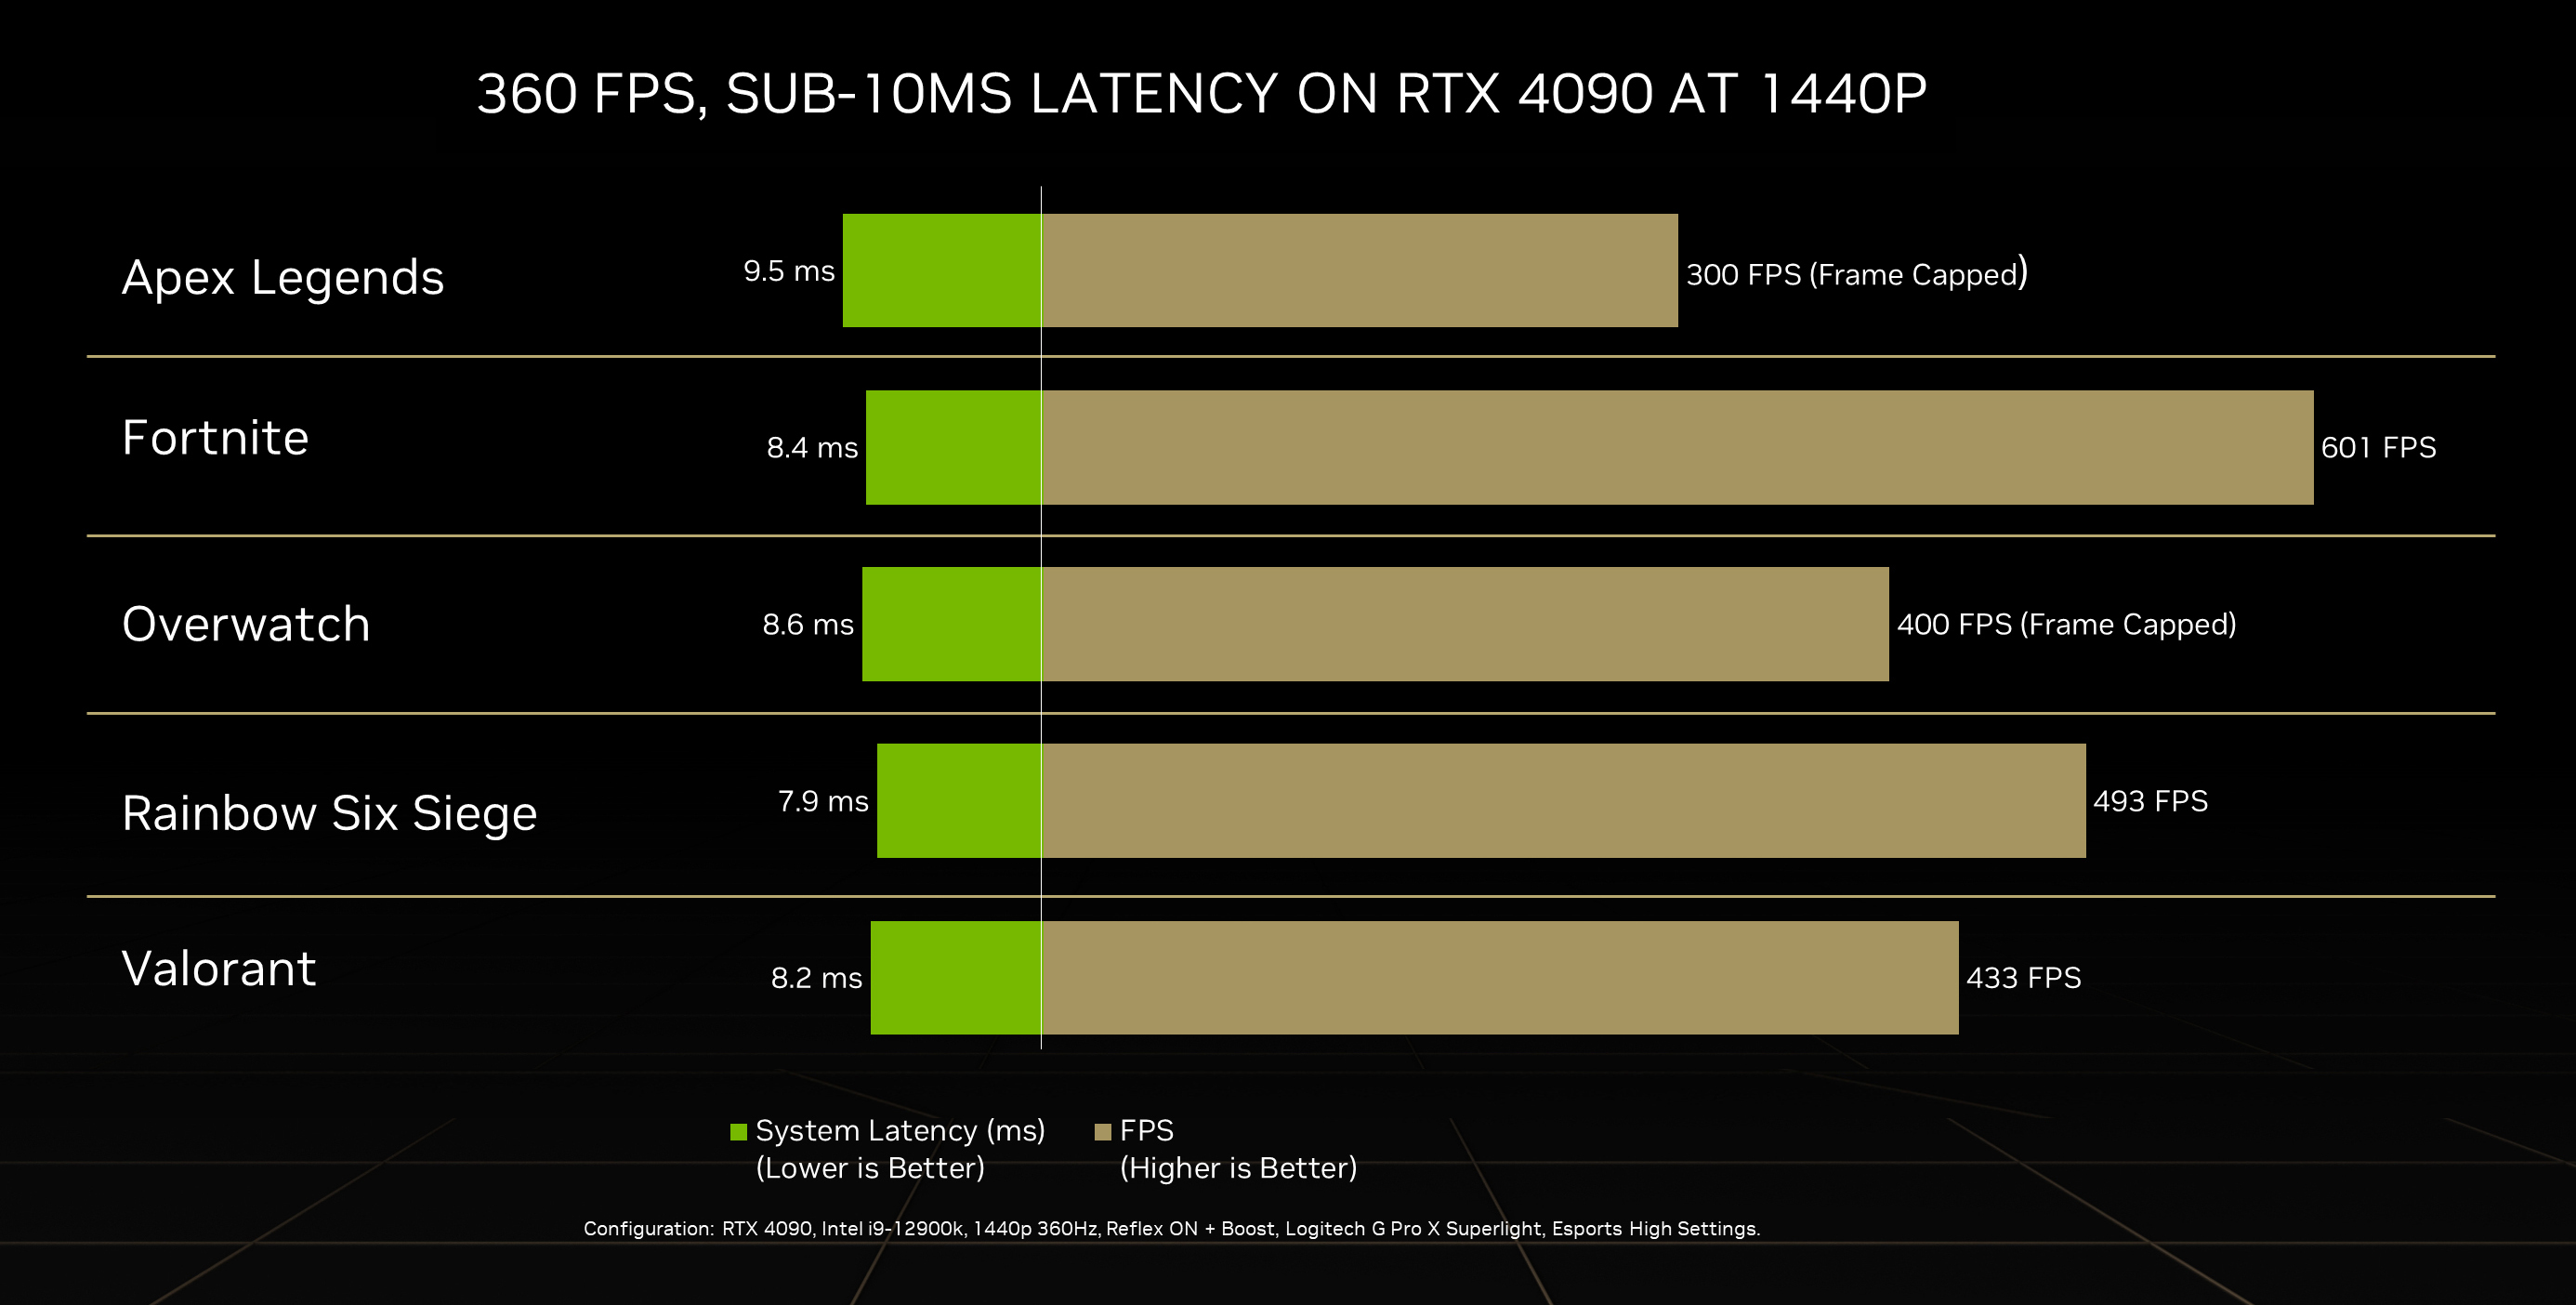 Nvidia’s RTX 4090 targets 300+ FPS at 1440p with low latency for competitive shooters